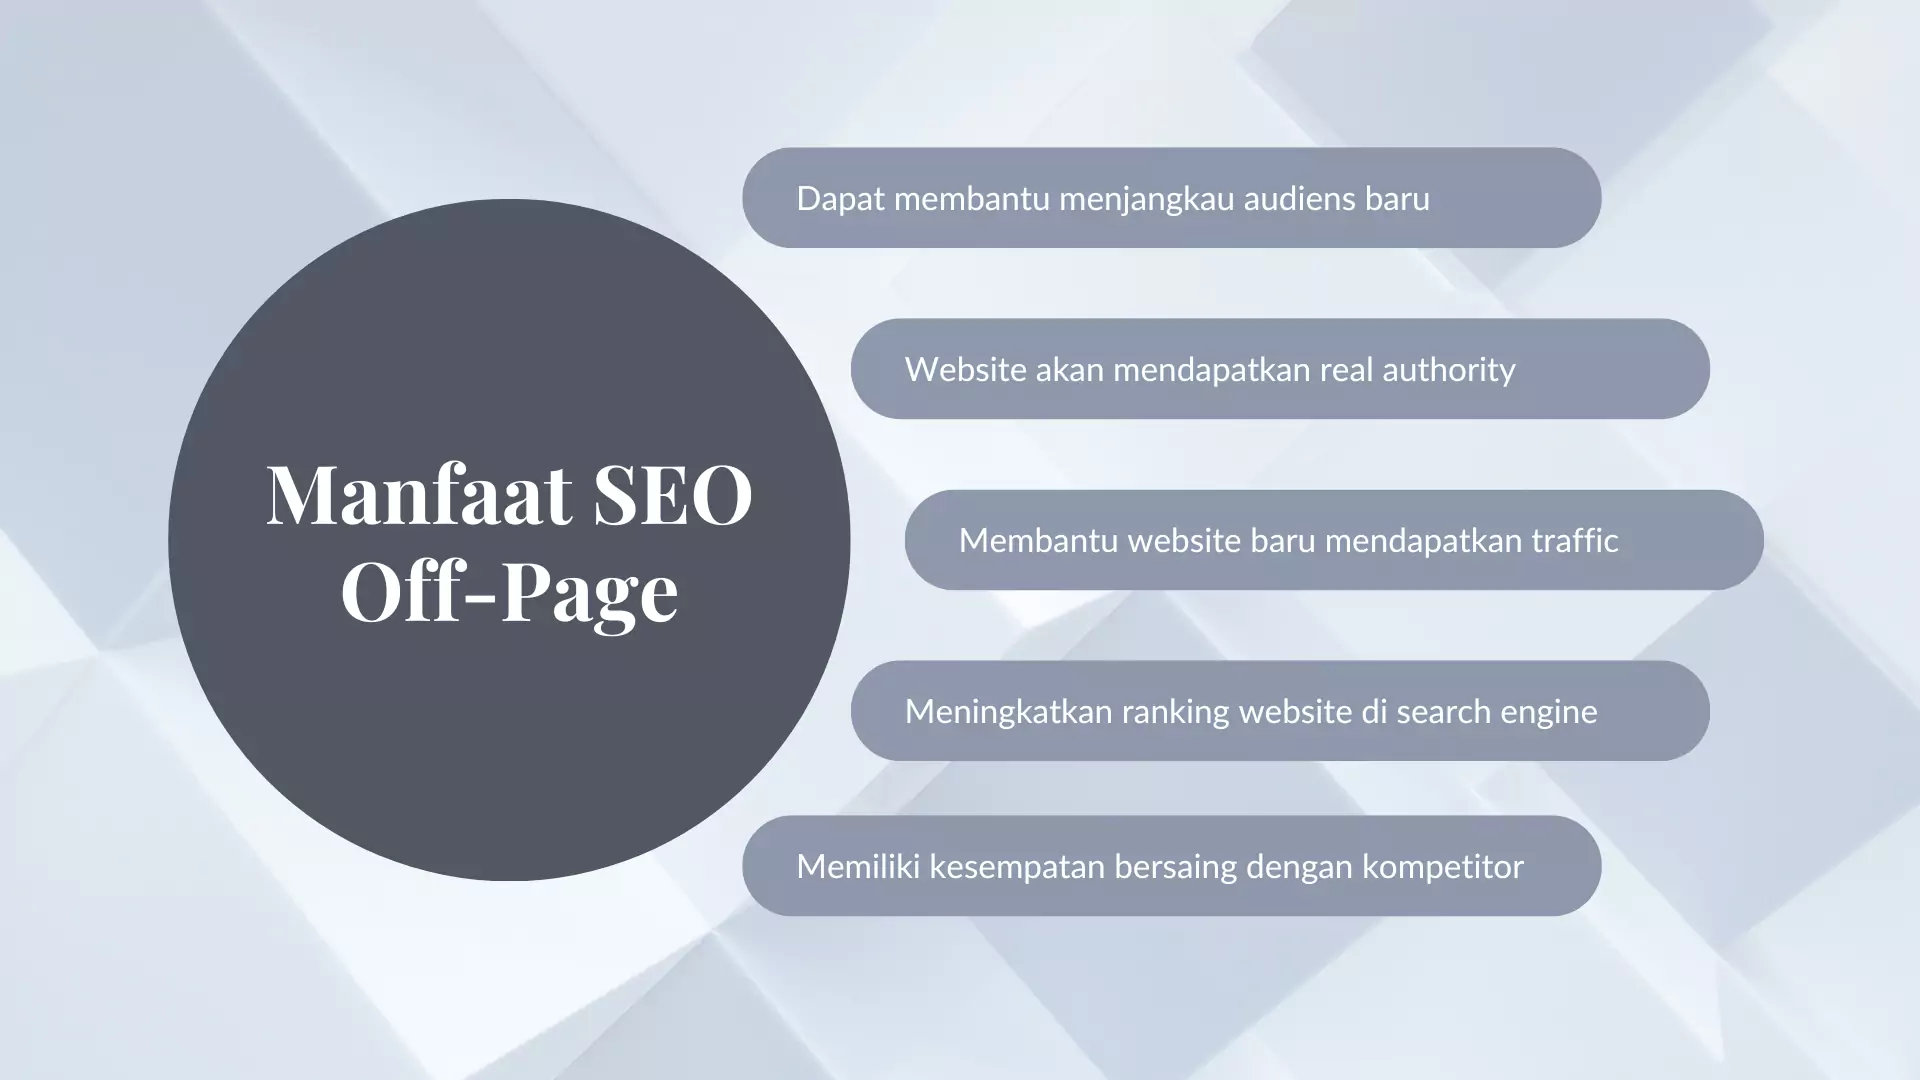 Manfaat SEO Off-Page